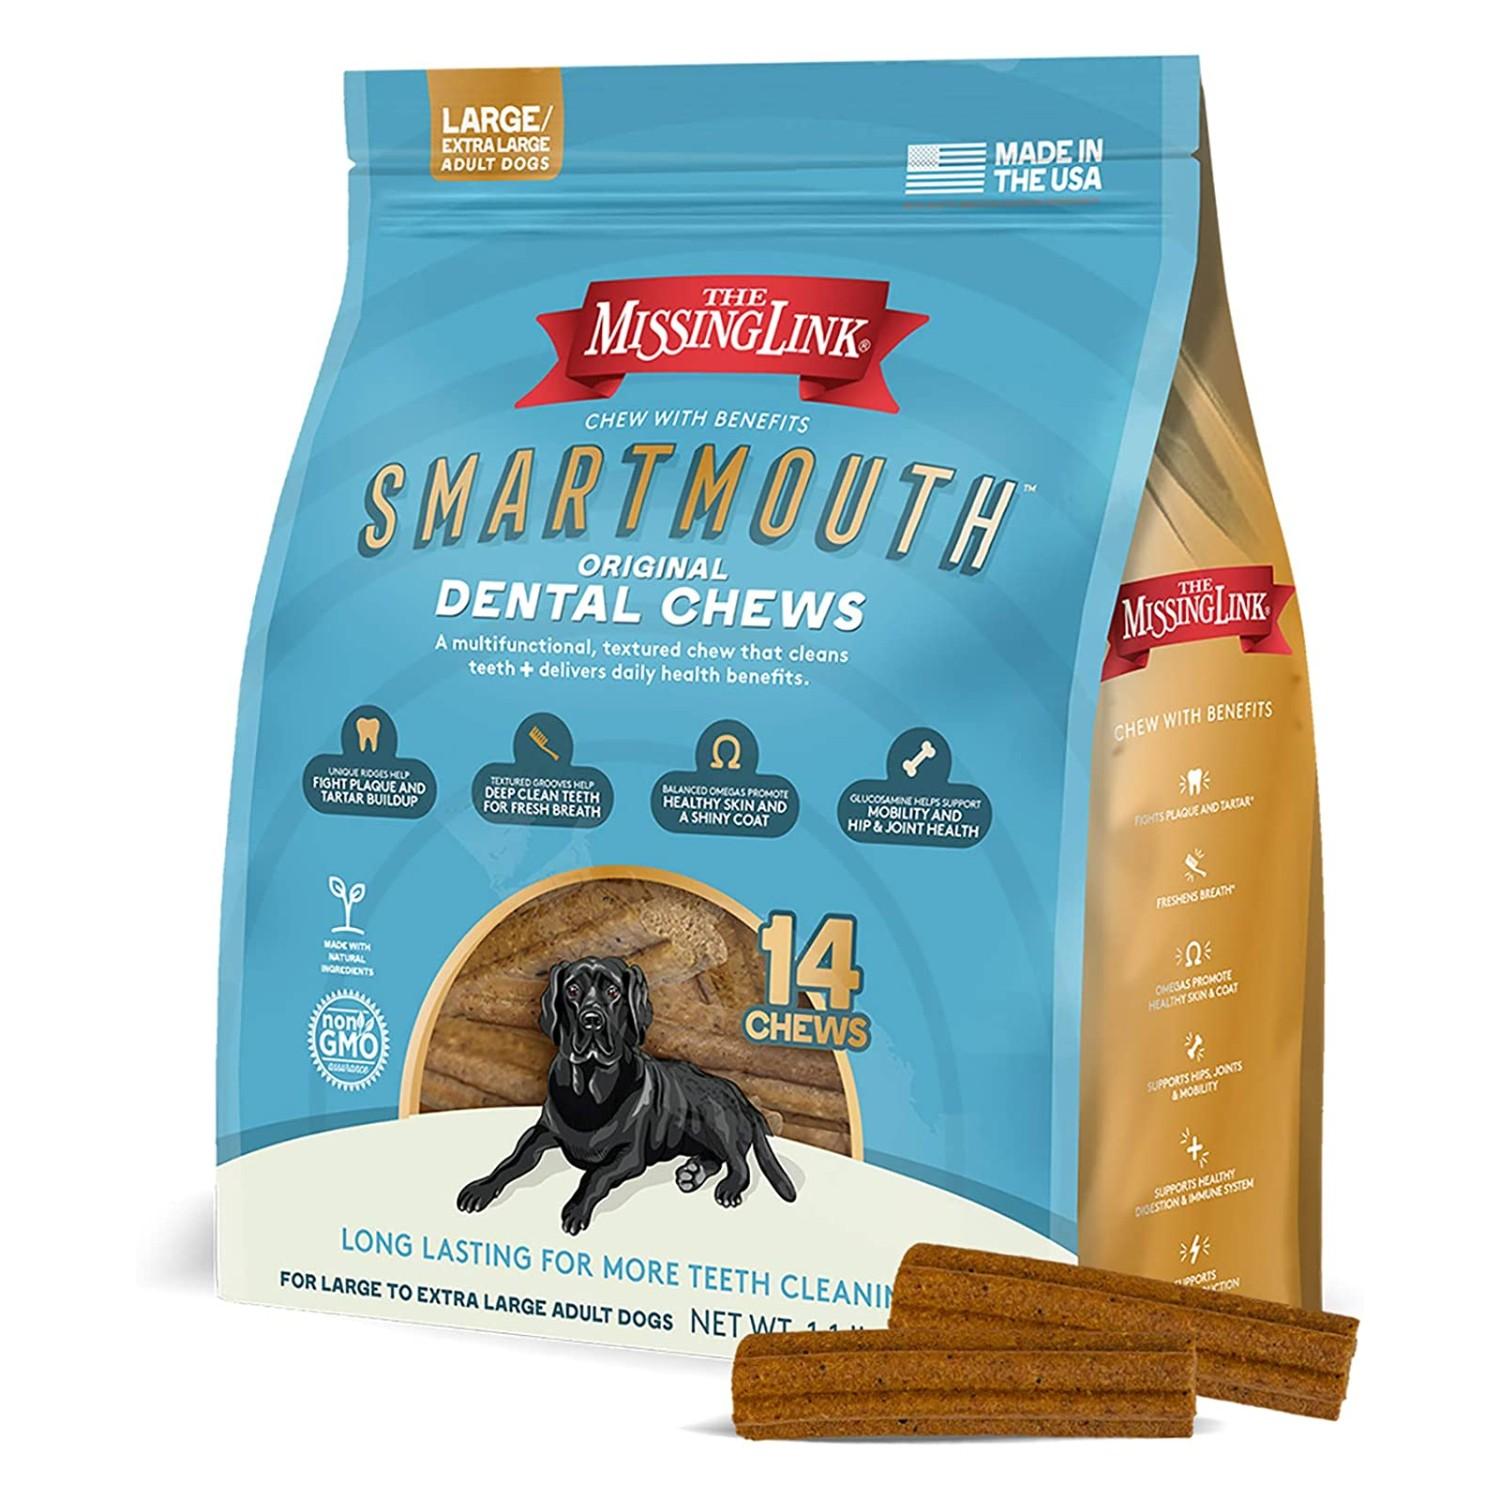 The Missing Link Smartmouth Dental Chews for Large/X-Large Dogs